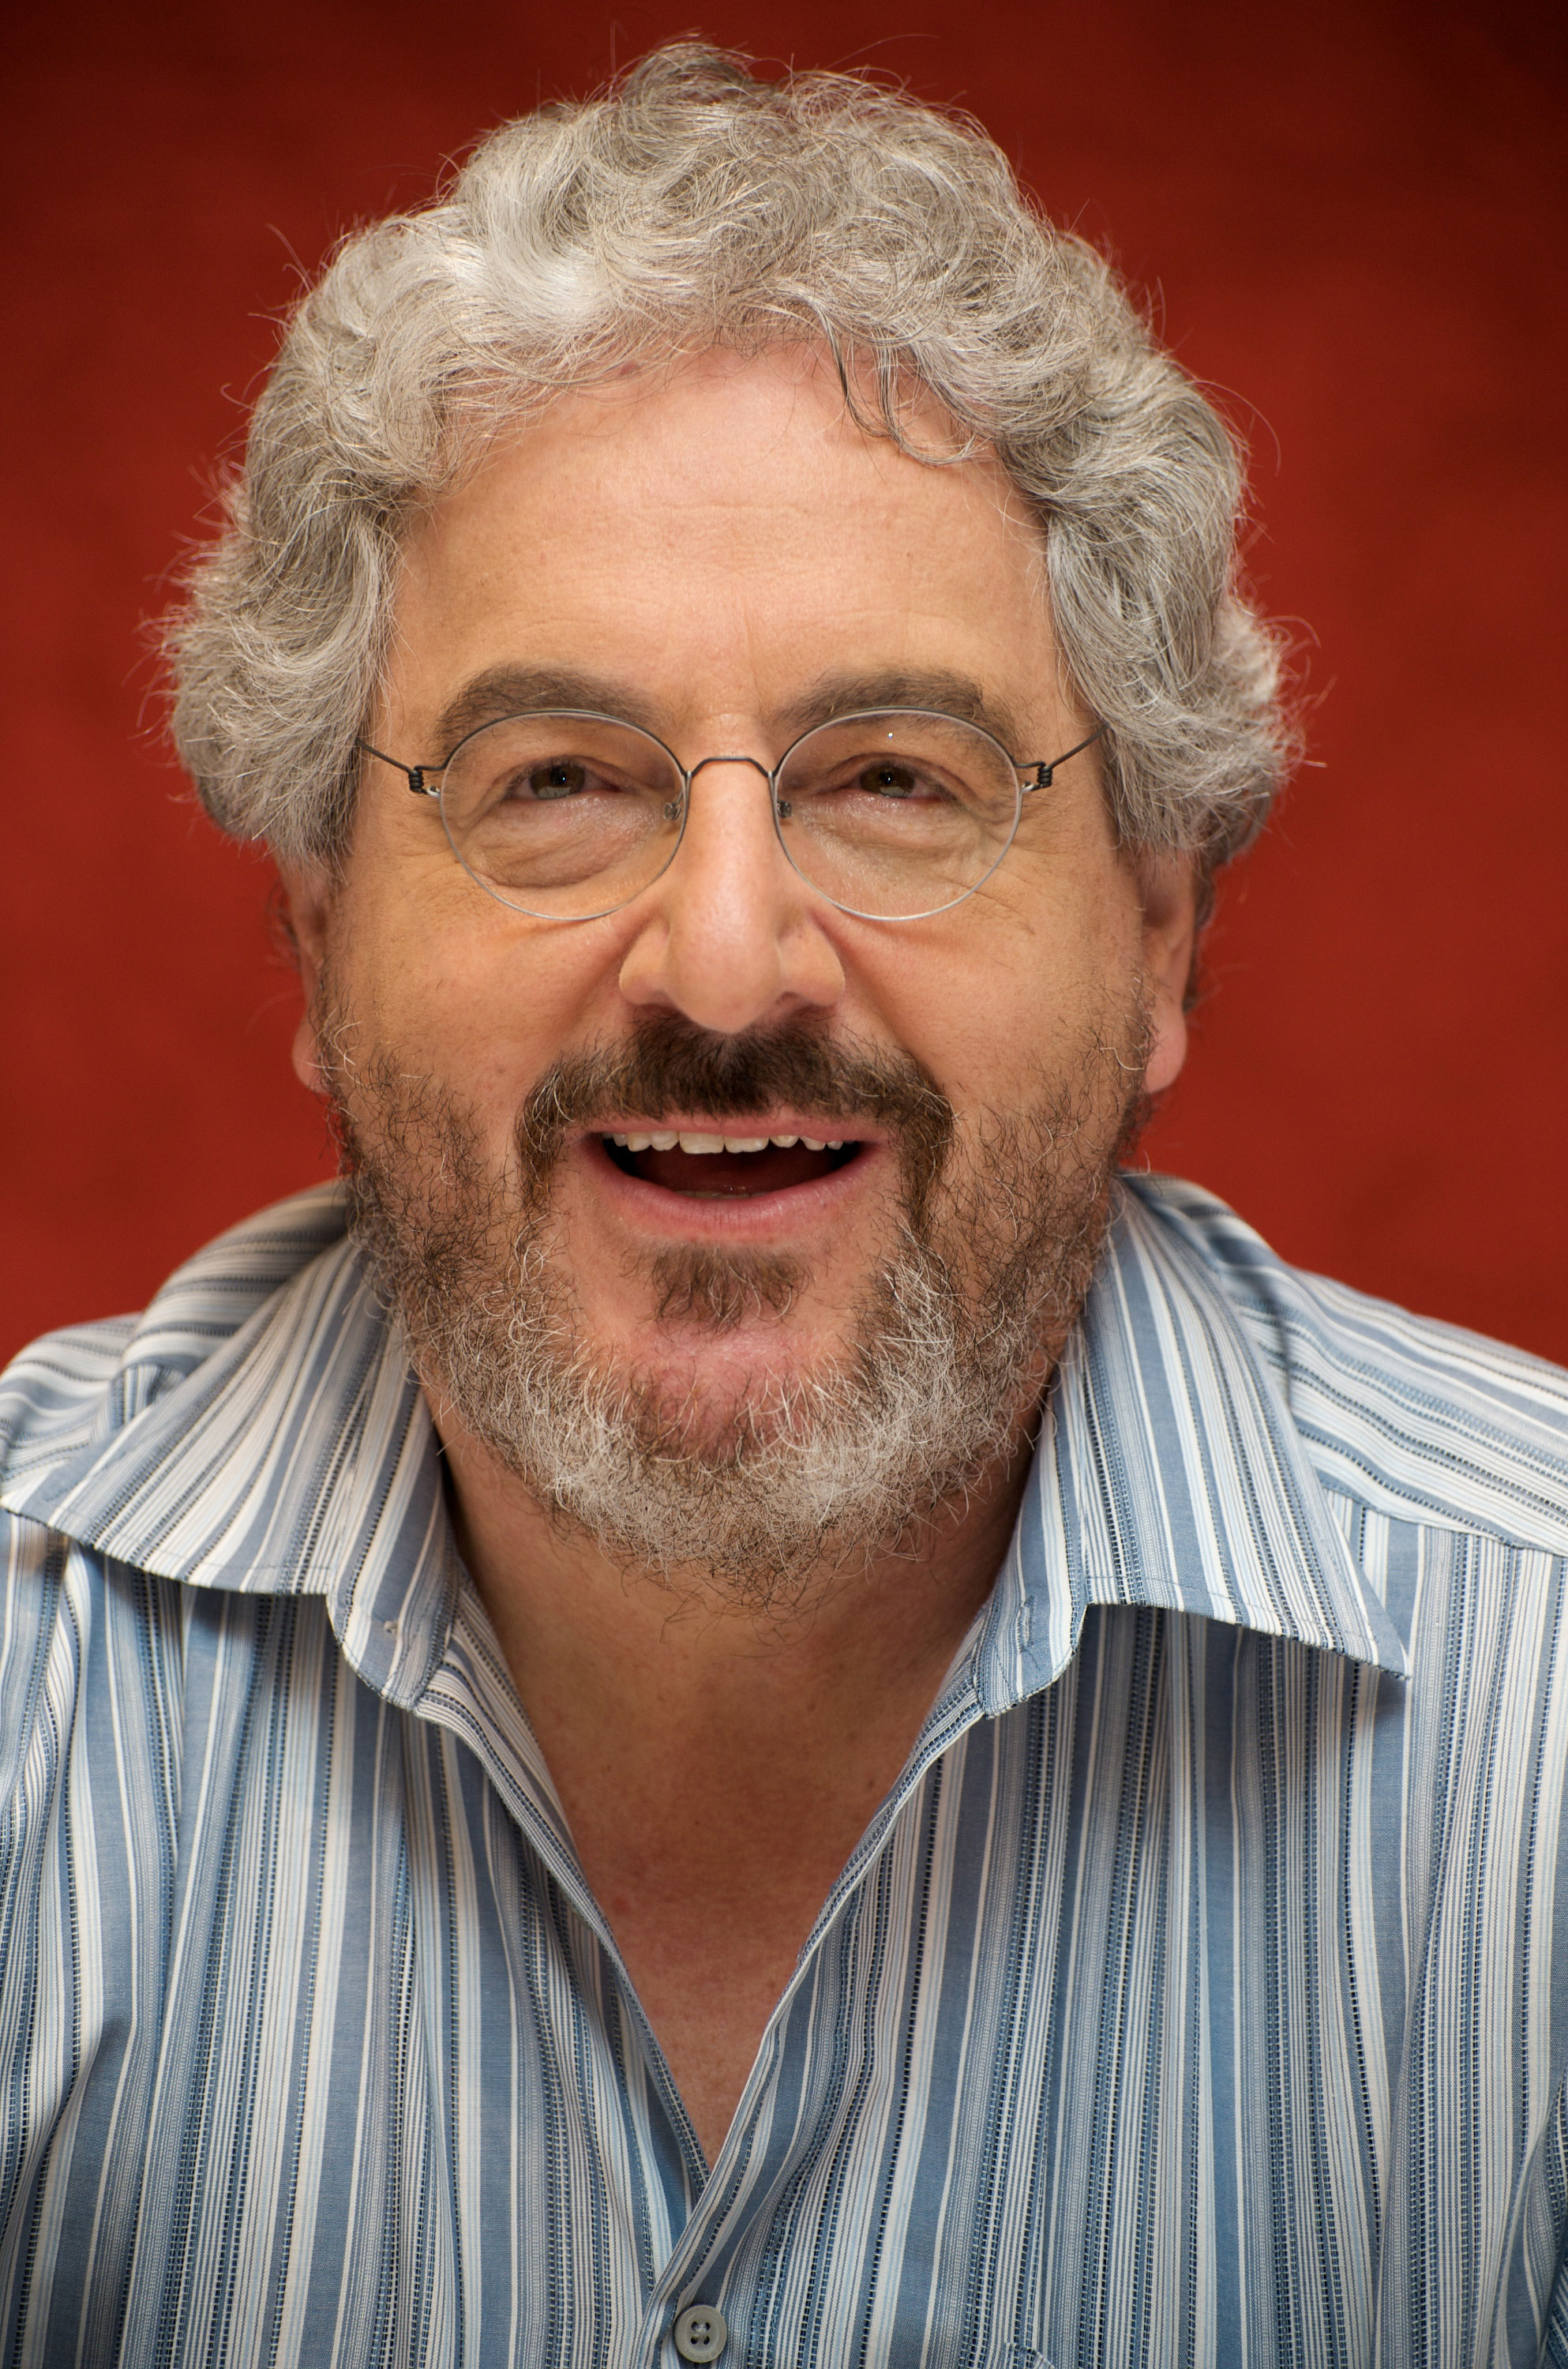 Director Harold Ramis at the "Year One" press conference at the Ritz Carlton Hotel on June 13, 2009 in New York City. (Vera Anderson—WireImage)